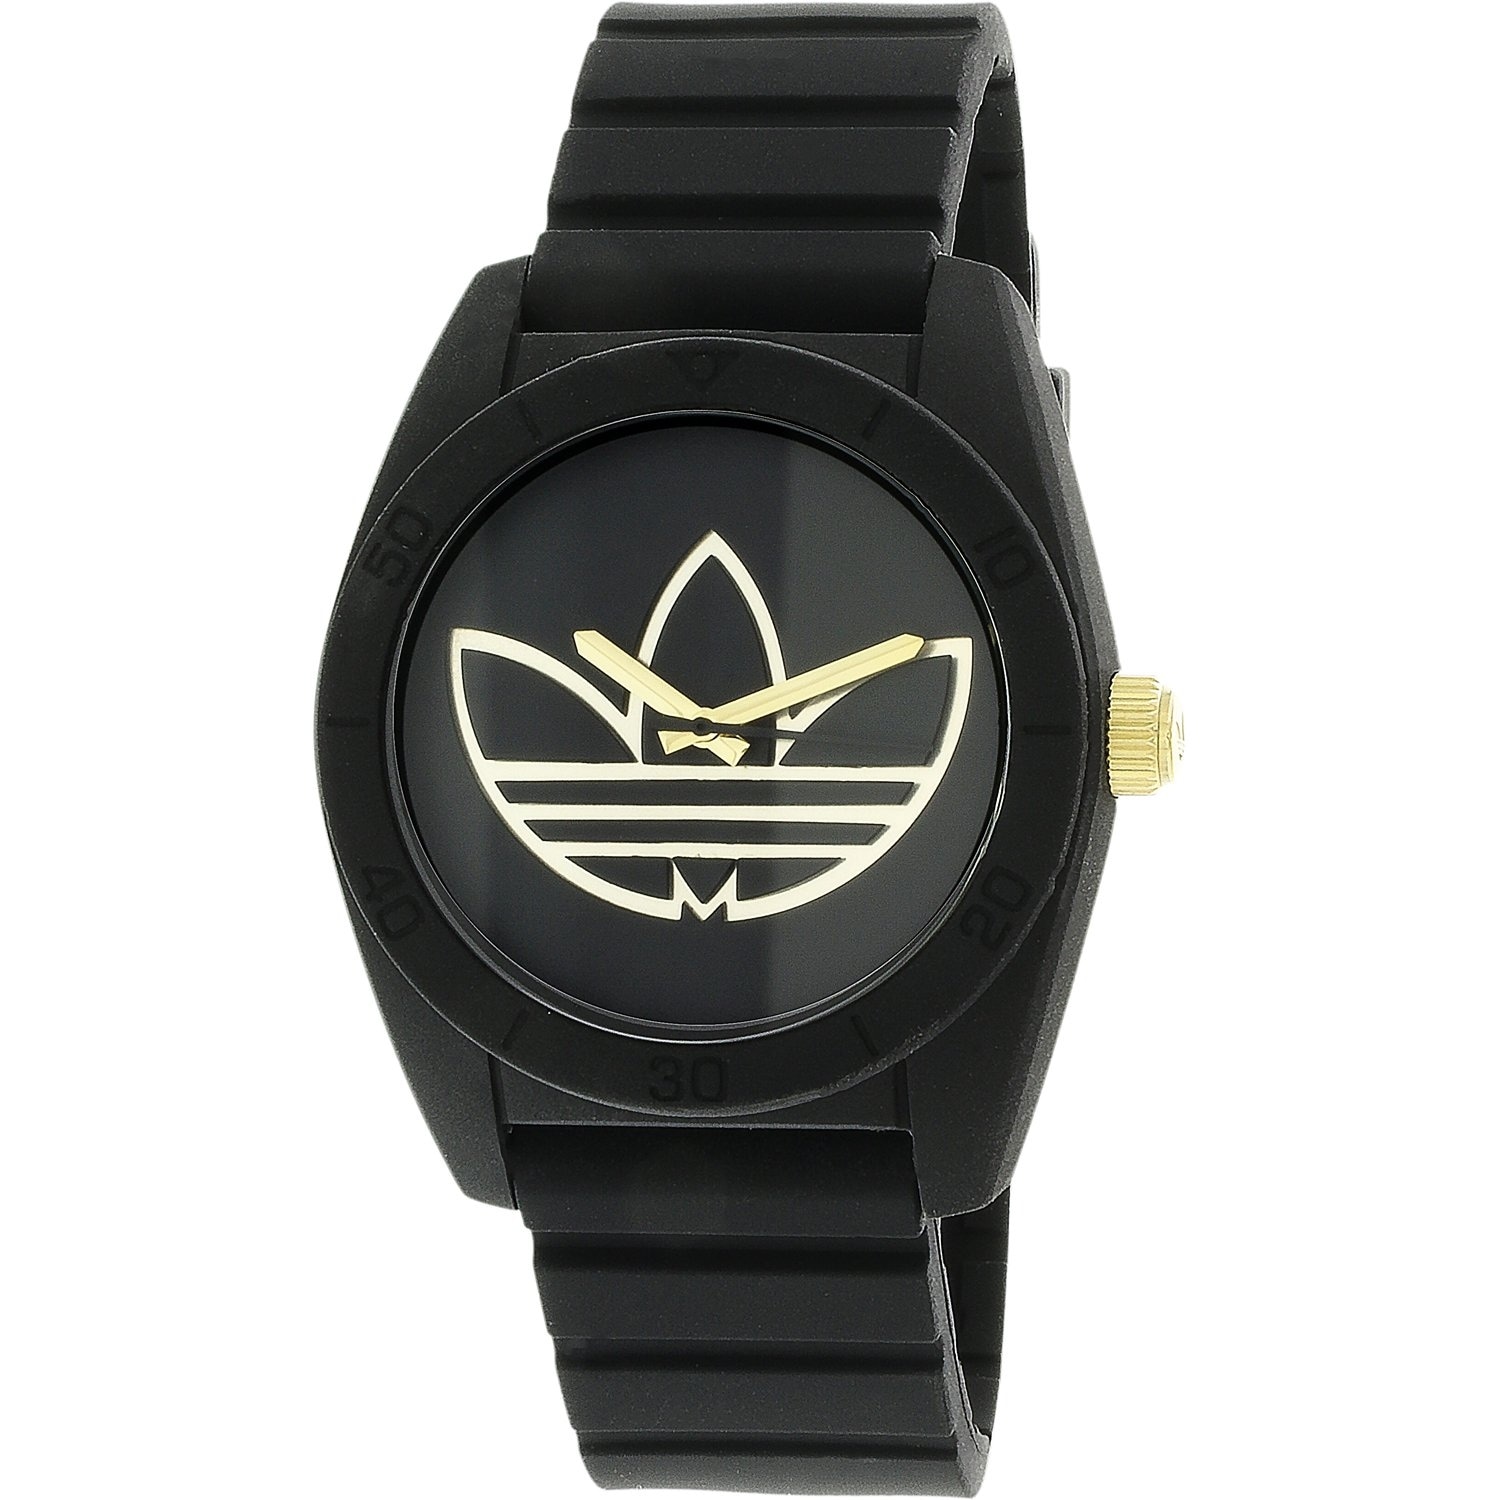 adidas watches sports direct